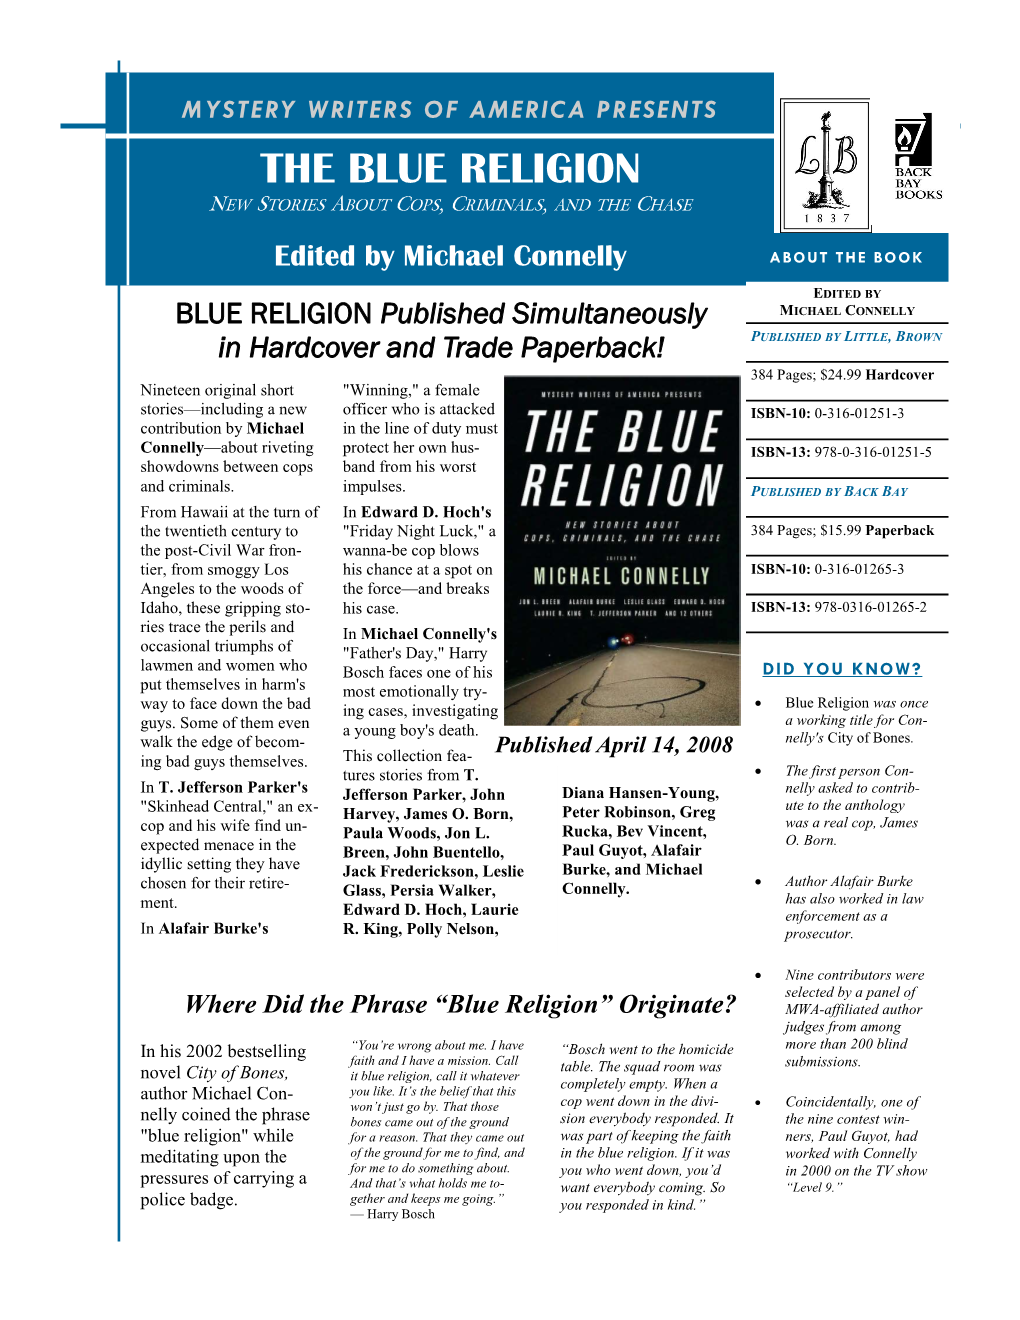 The Blue Religion New Stories About Cops, Criminals, and the Chase